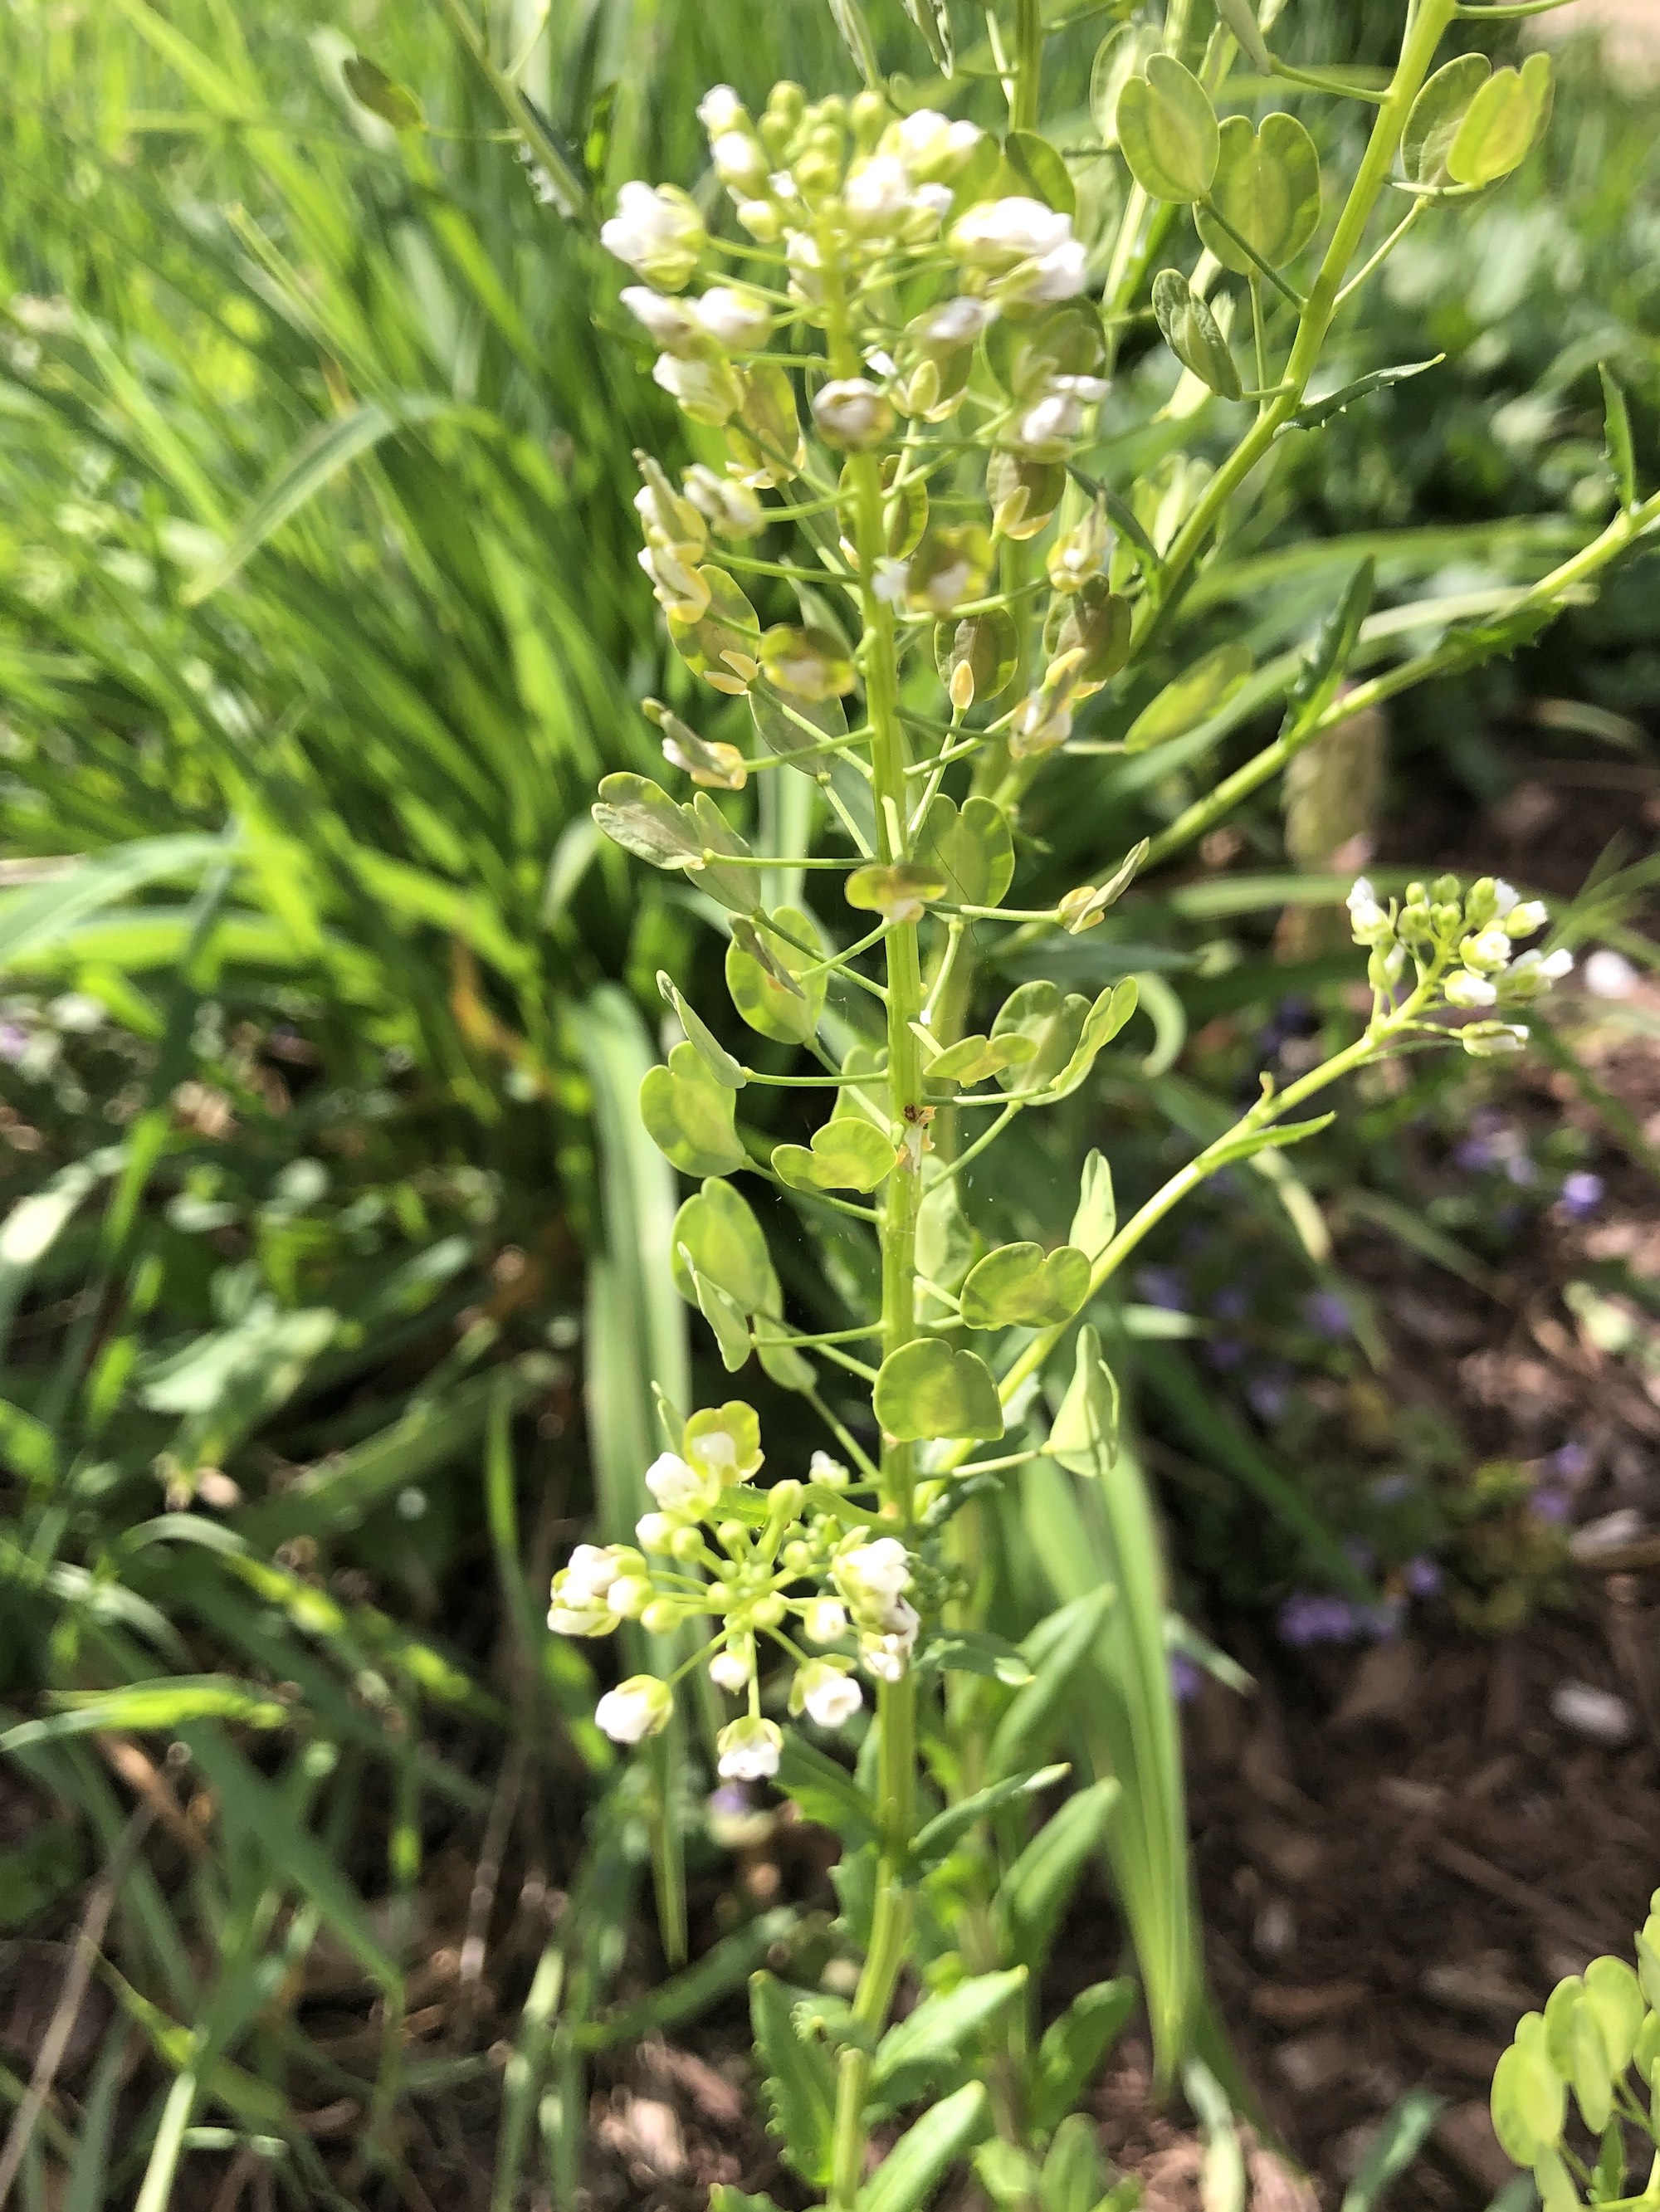 Field Pennycress near retaining pond on corner of Manitou Way and Nakoma Road in Madison, Wisconsin on May 4, 2021.